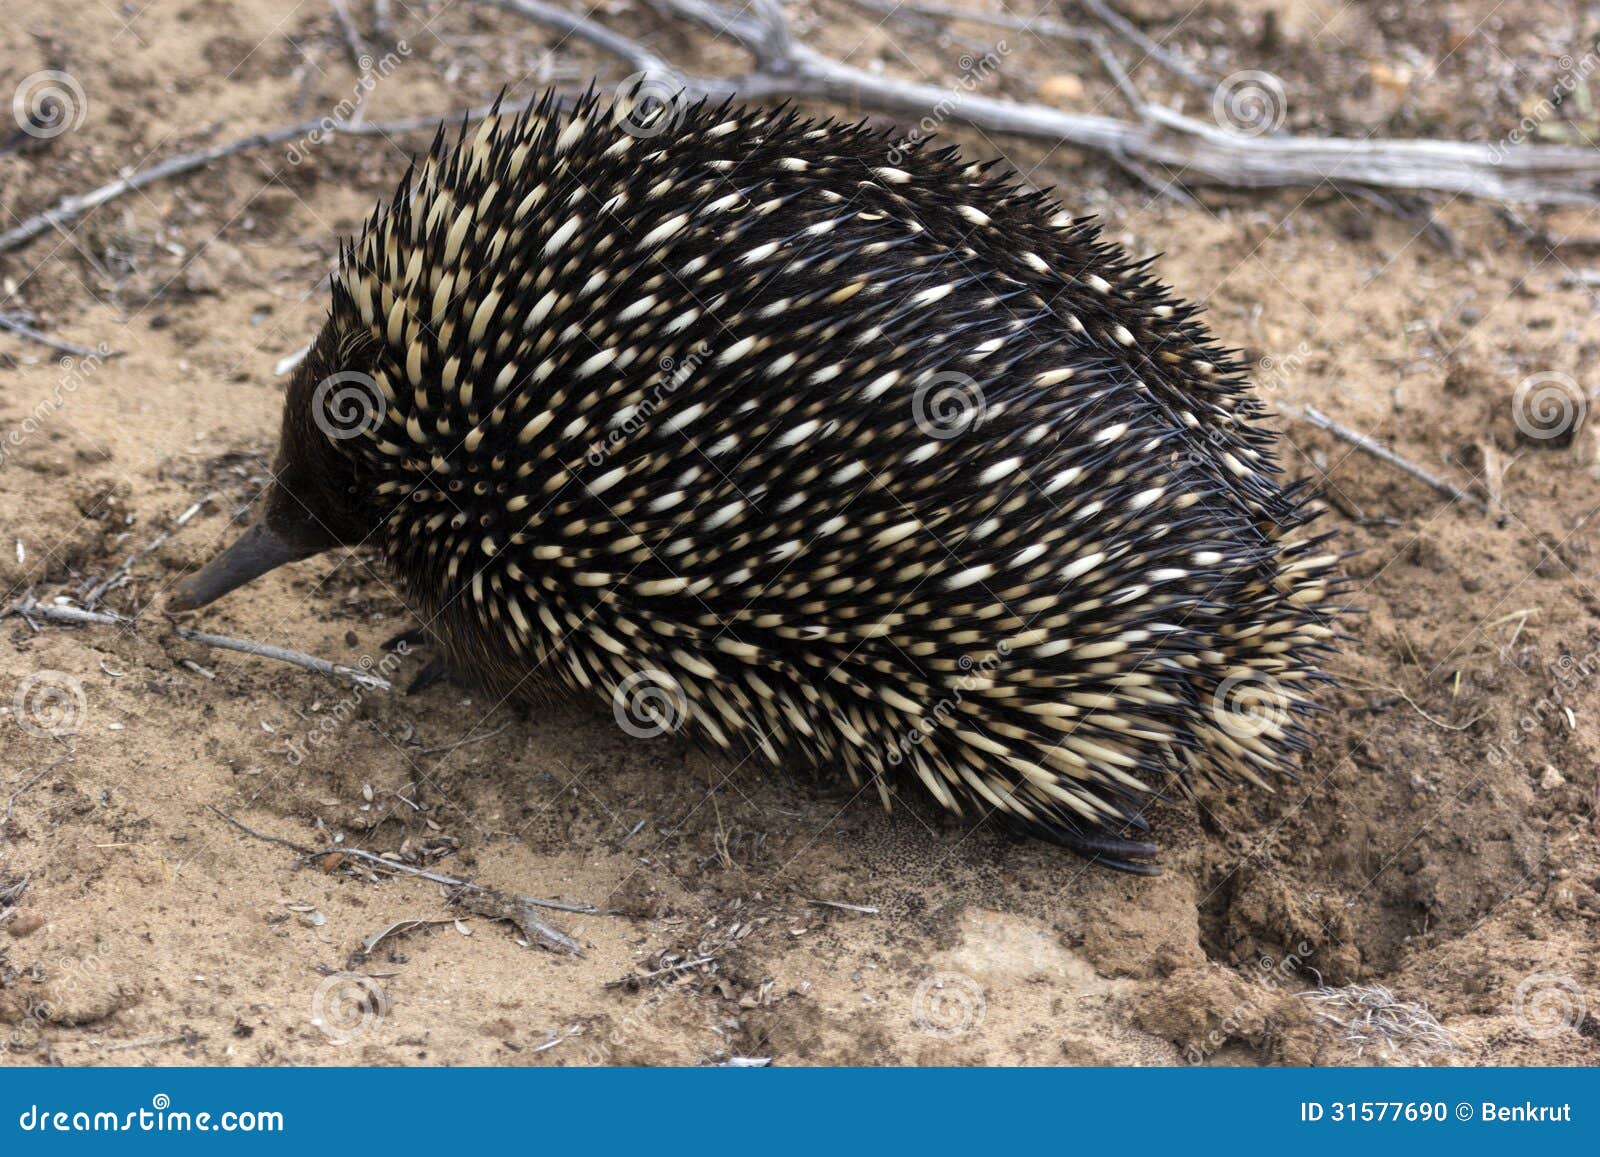 Echidna stock photo. Image of shortbeaked, spine, solitary - 31577690